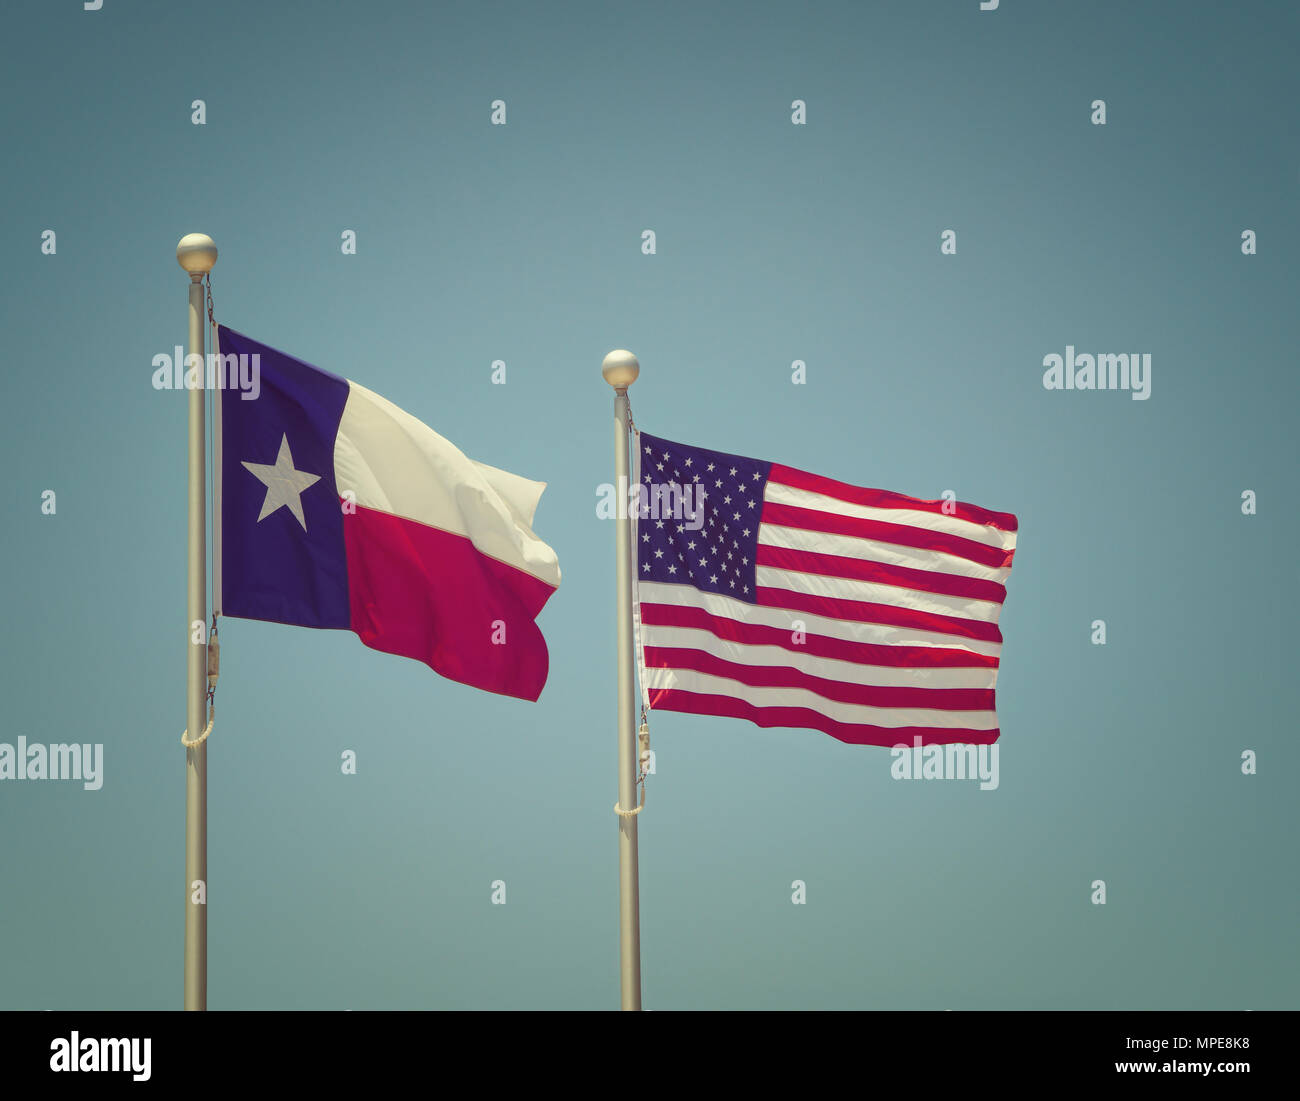 The state flag of Texas and American flag waving in the wind on flagpole. Blue sky background with copy space. Vintage filter effects. Stock Photo